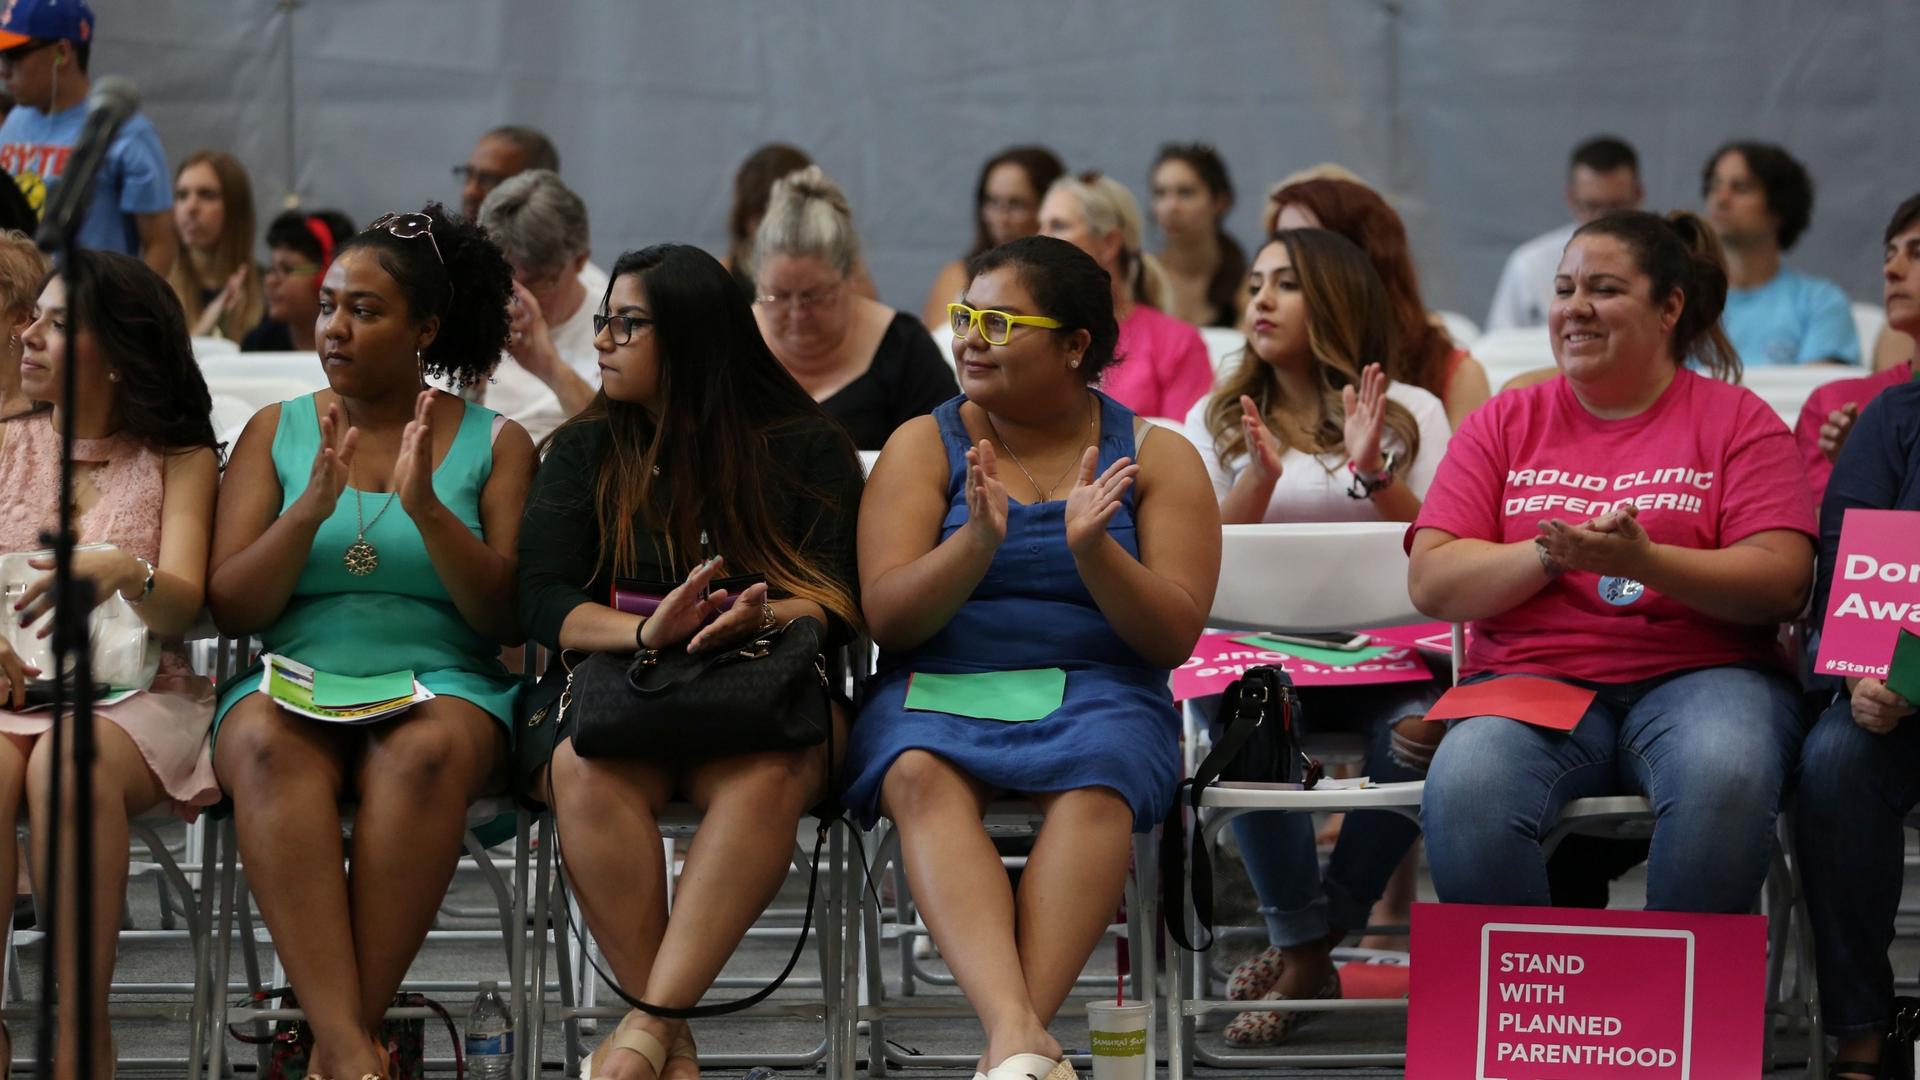 People attend a bilingual health care town hall sponsored by local organizations that work in Latino voter outreach, disability advocacy and community health at the Ability360 Center in Phoenix, July 5, 2017. Senators John McCain and Jeff Flake were invit